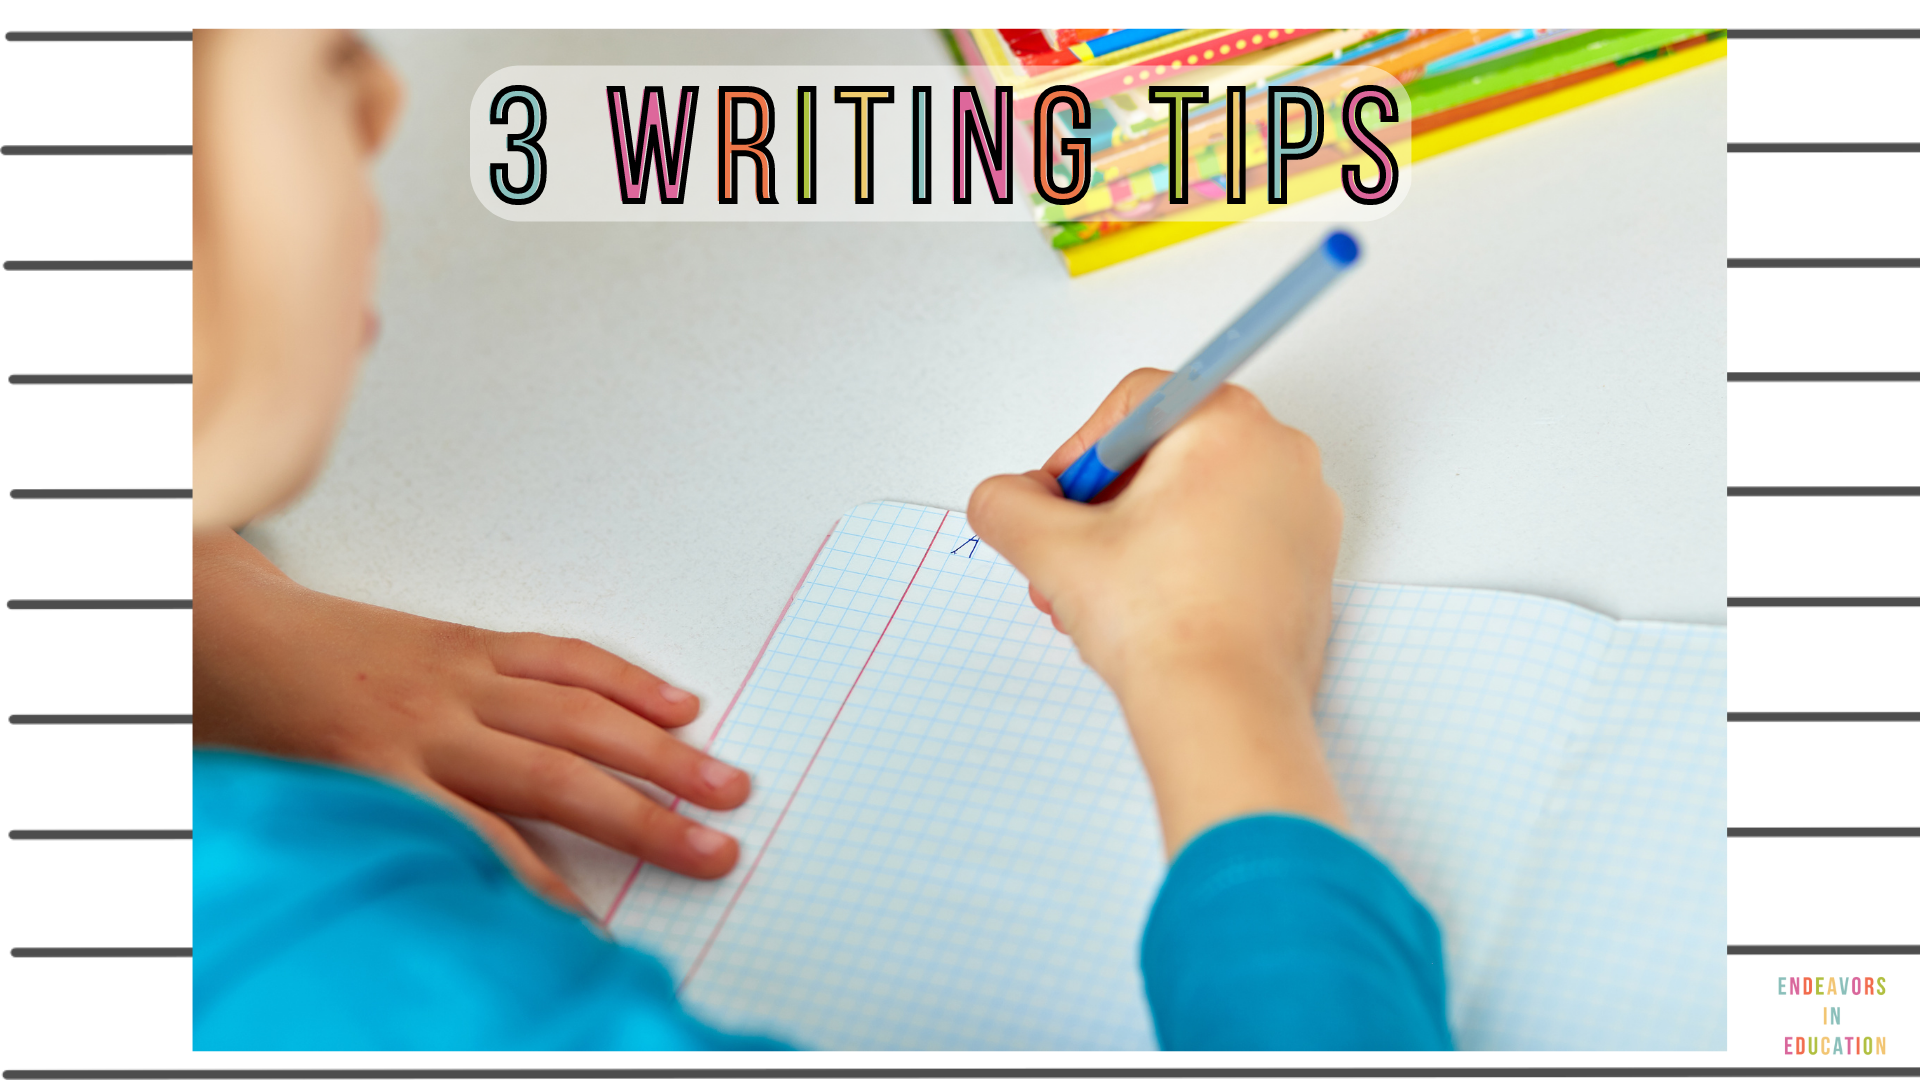 Text says 3 writing tips and shows a child writing in a notebook